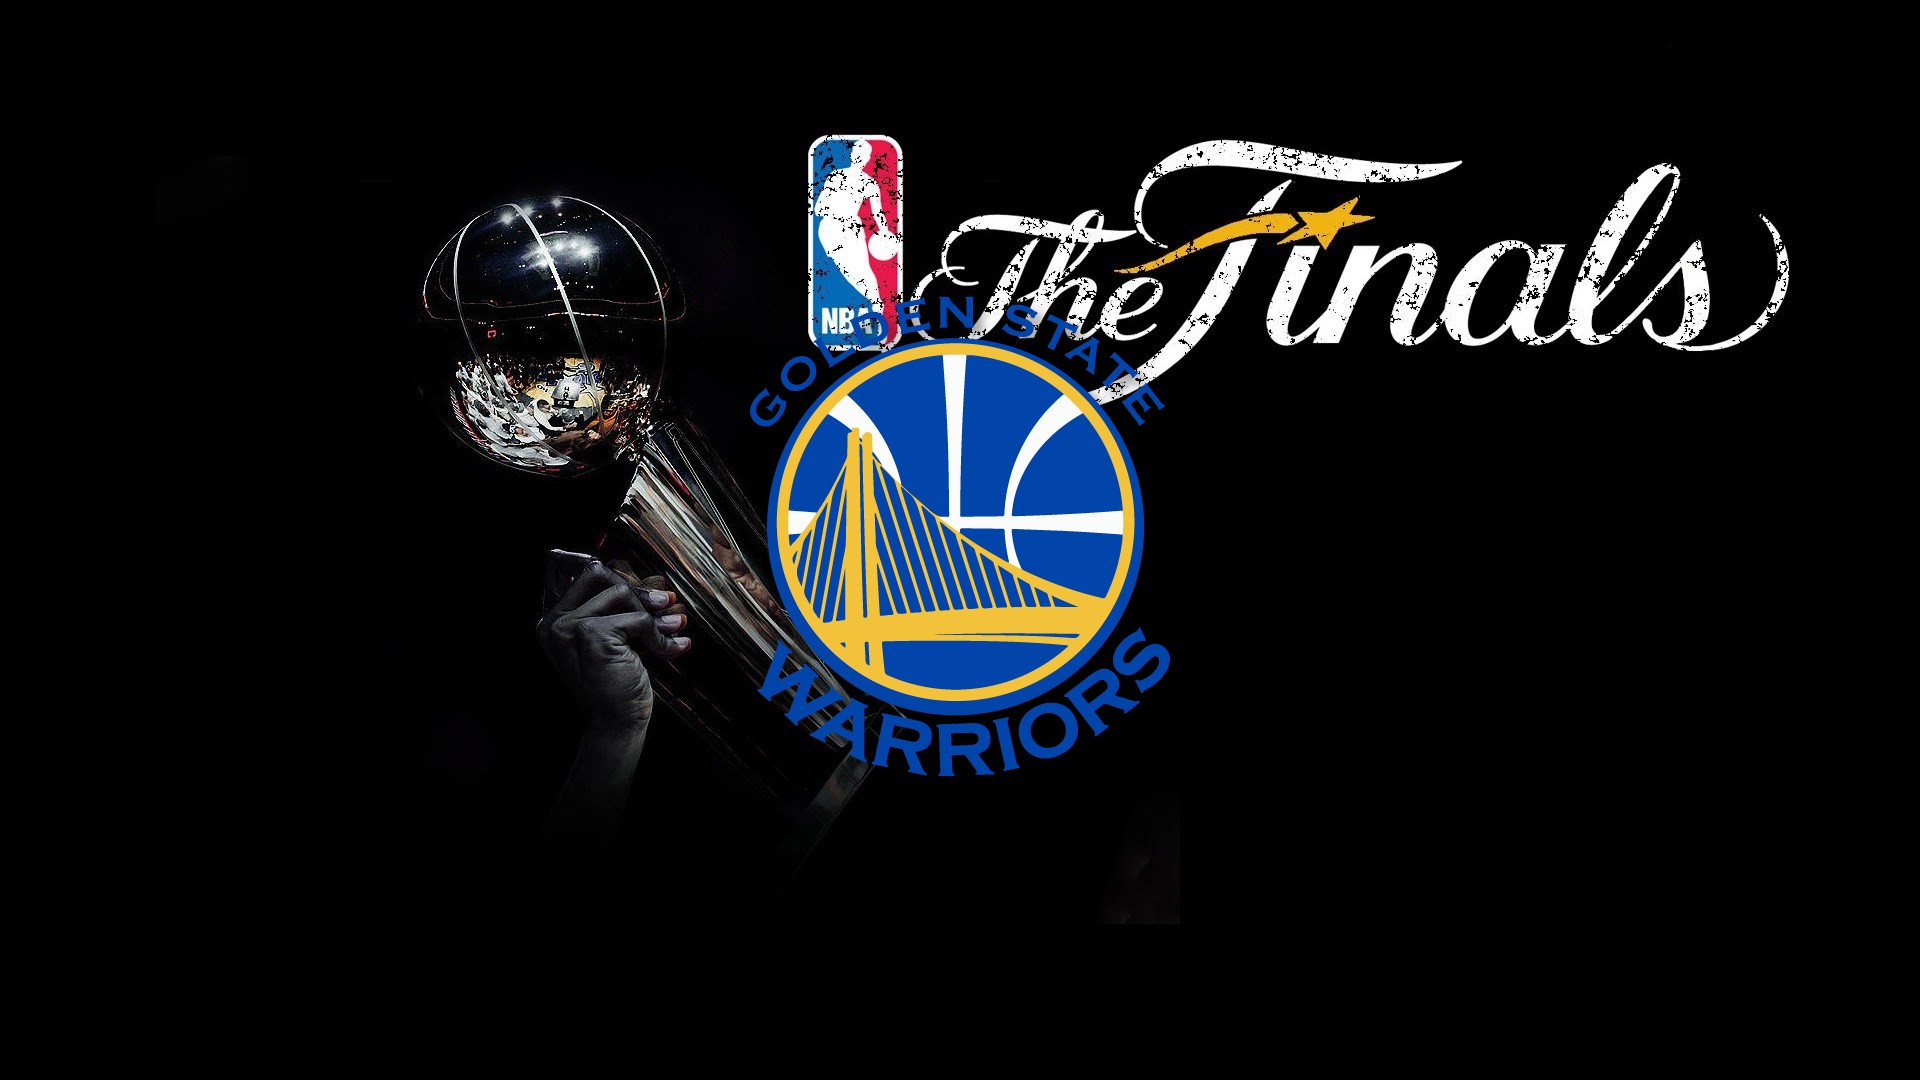 Wallpaper Golden State Warriors Desktop with resolution 1920X1080 pixel. You can use this wallpaper as background for your desktop Computer Screensavers, Android or iPhone smartphones